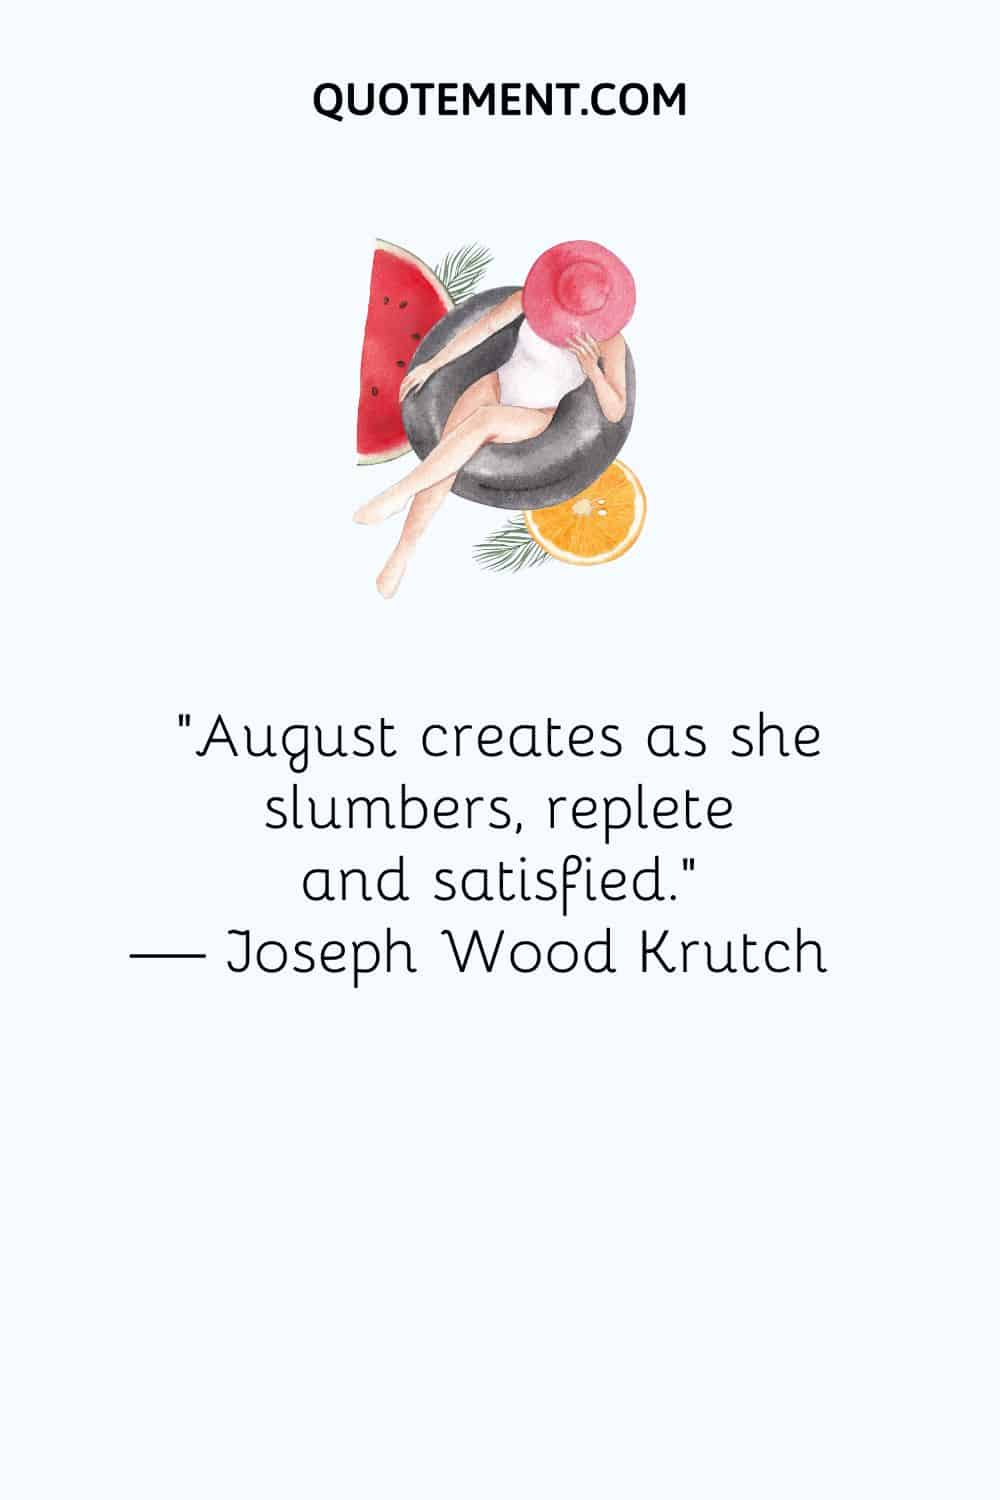 August creates as she slumbers, replete and satisfied